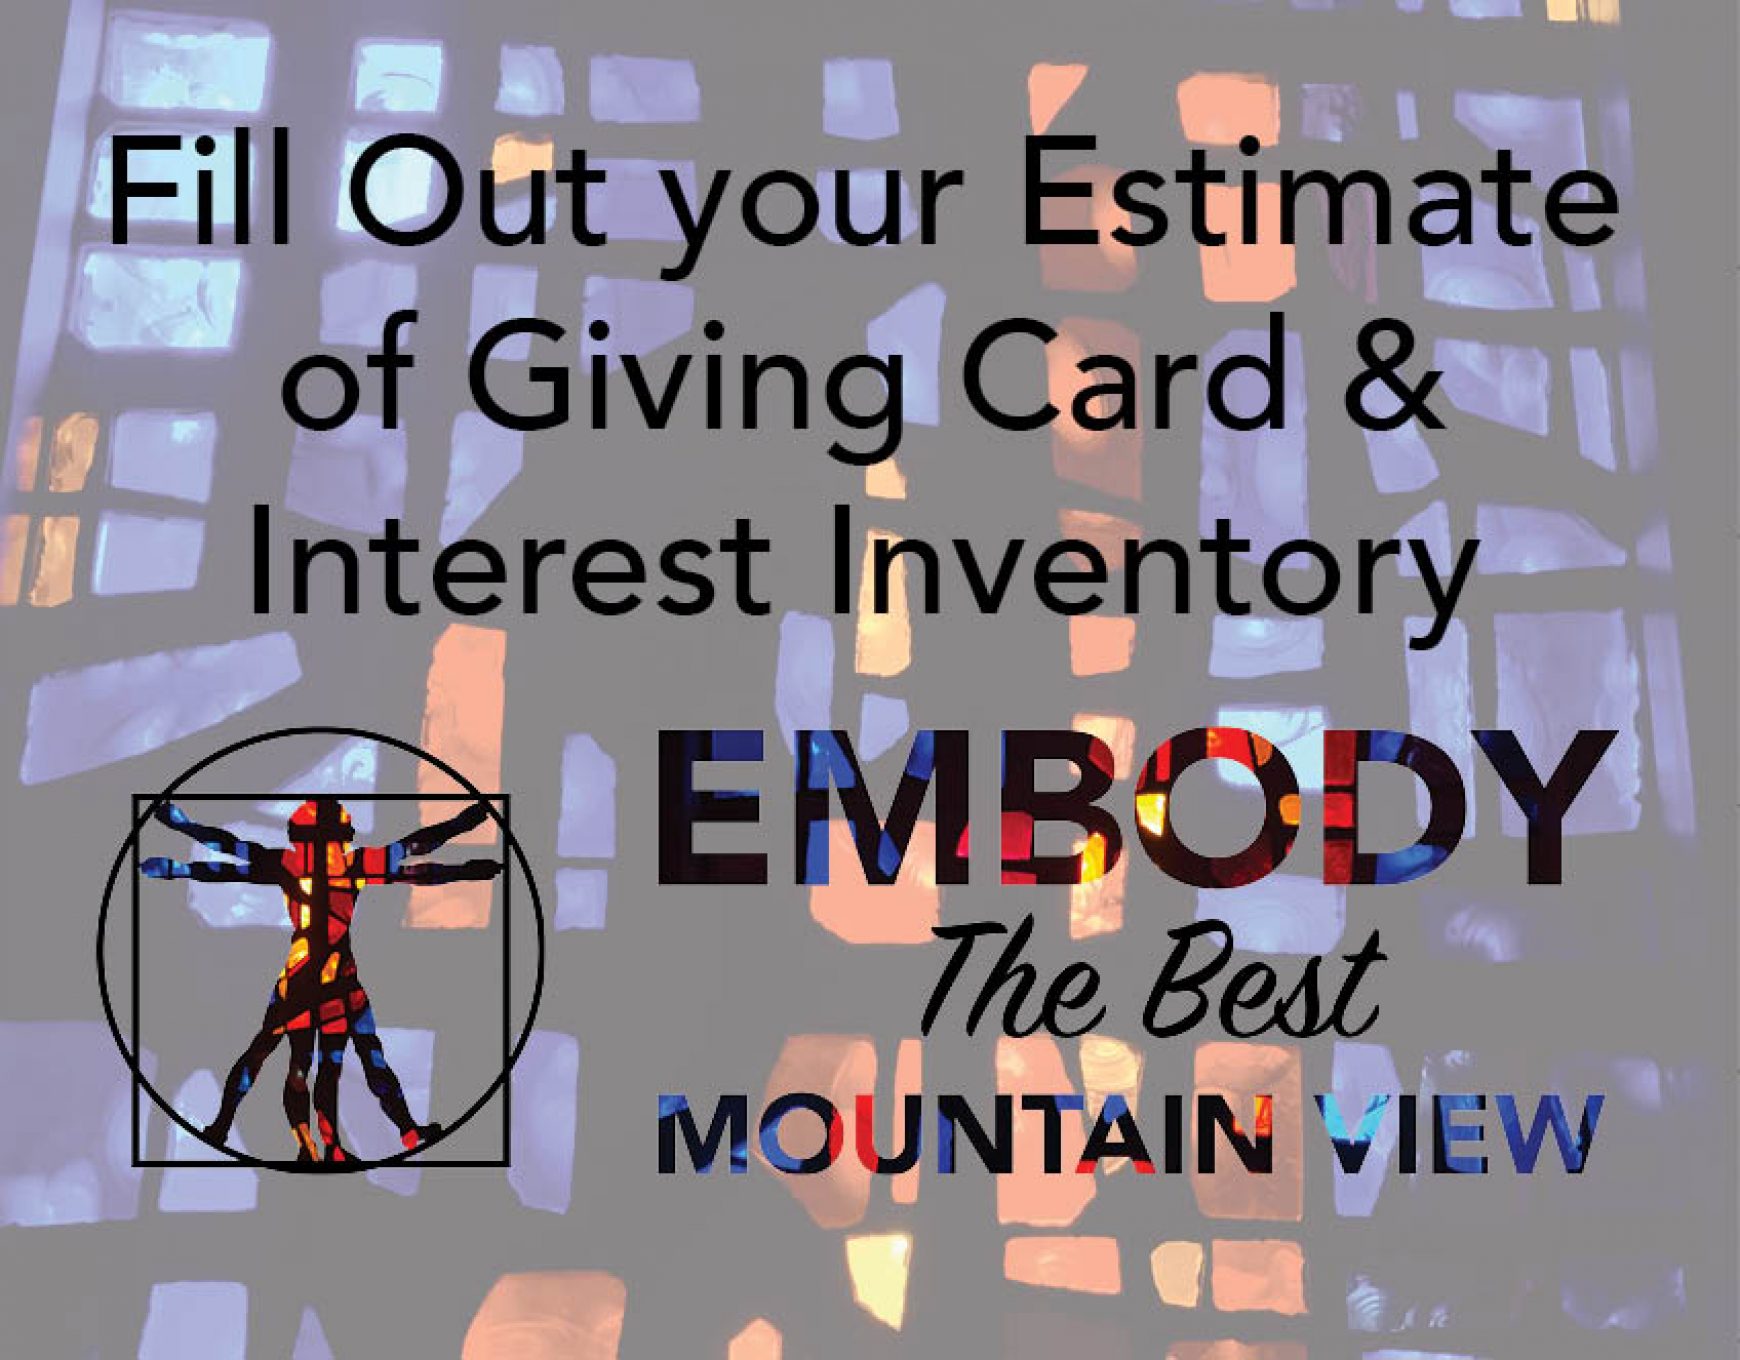 Turn in your Estimate of Giving Card & Interest Inventory